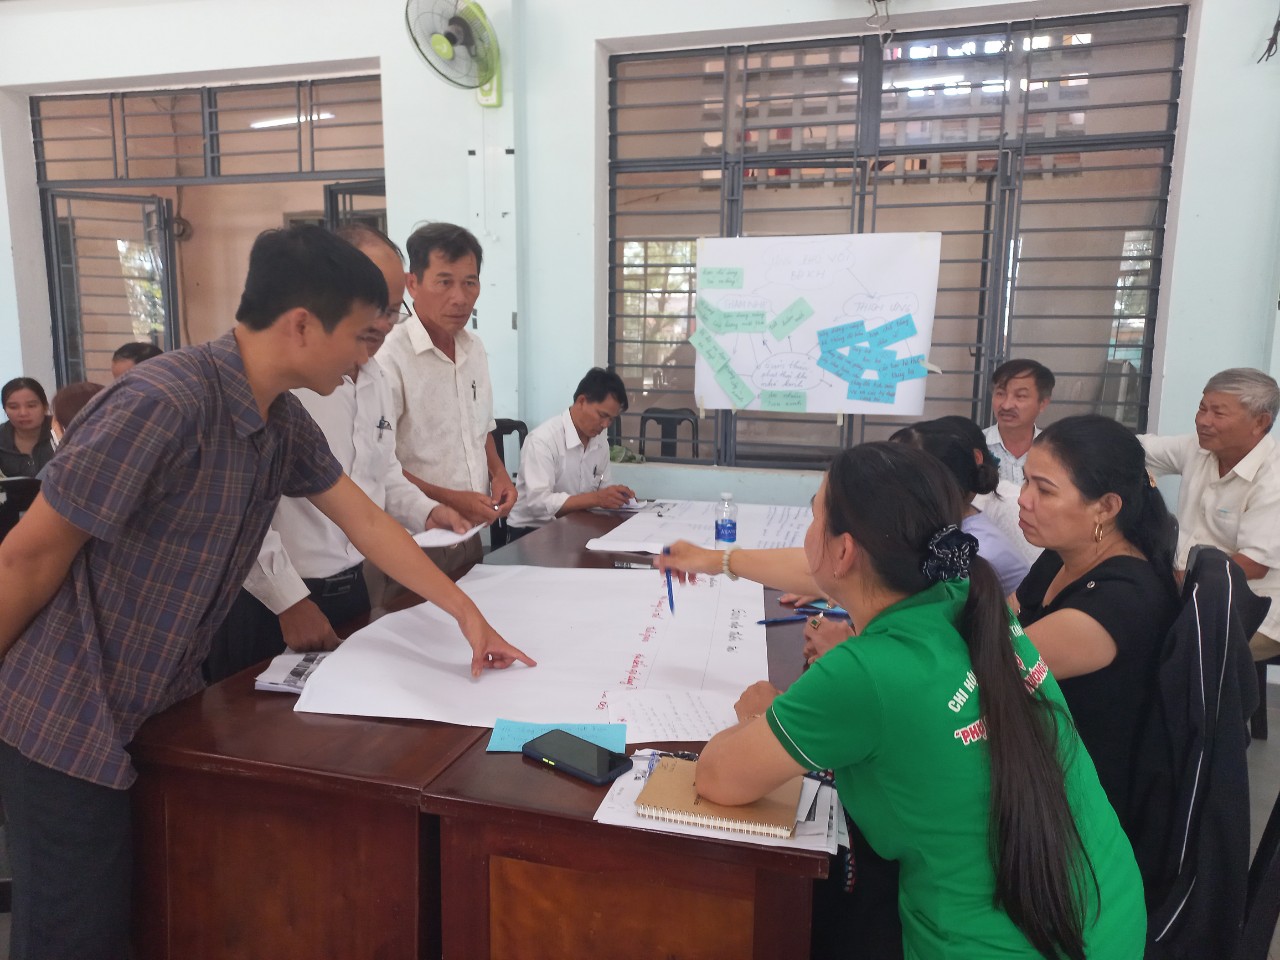 Group meeting to plan the implementation of targets in the residential area (Hoa Vang)